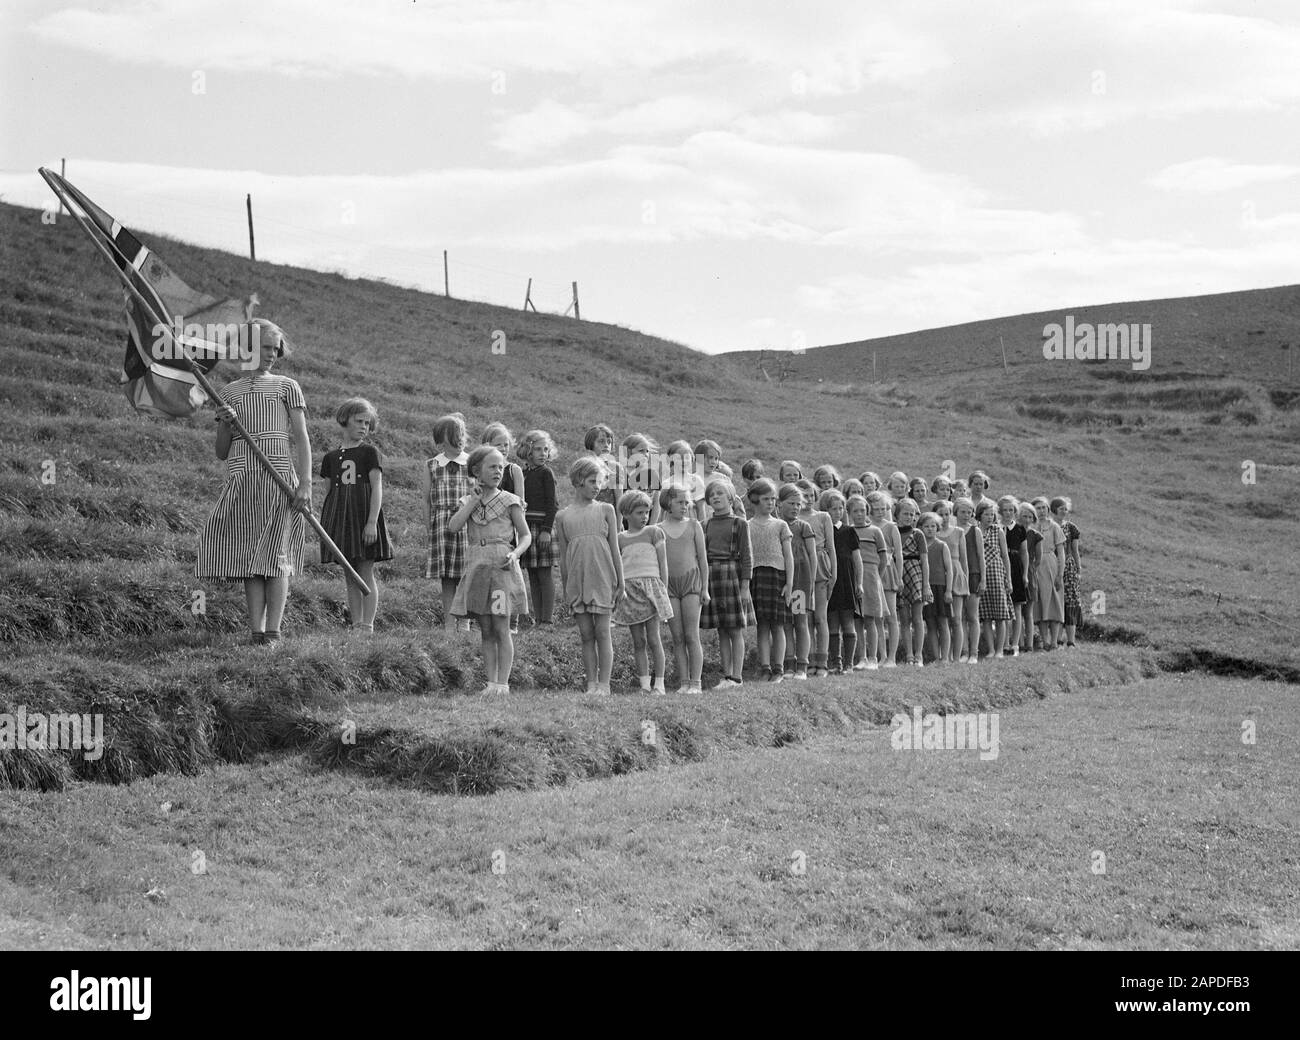 Iceland Description: Alafoss. Young girls, one of whom bearing the Icelandic flag, are lined up in line on the steps of an amphitheater Date: 1934 Location: Iceland, Àlafoss Keywords: amphitheatres, girls, ceremonies, flags Stock Photo